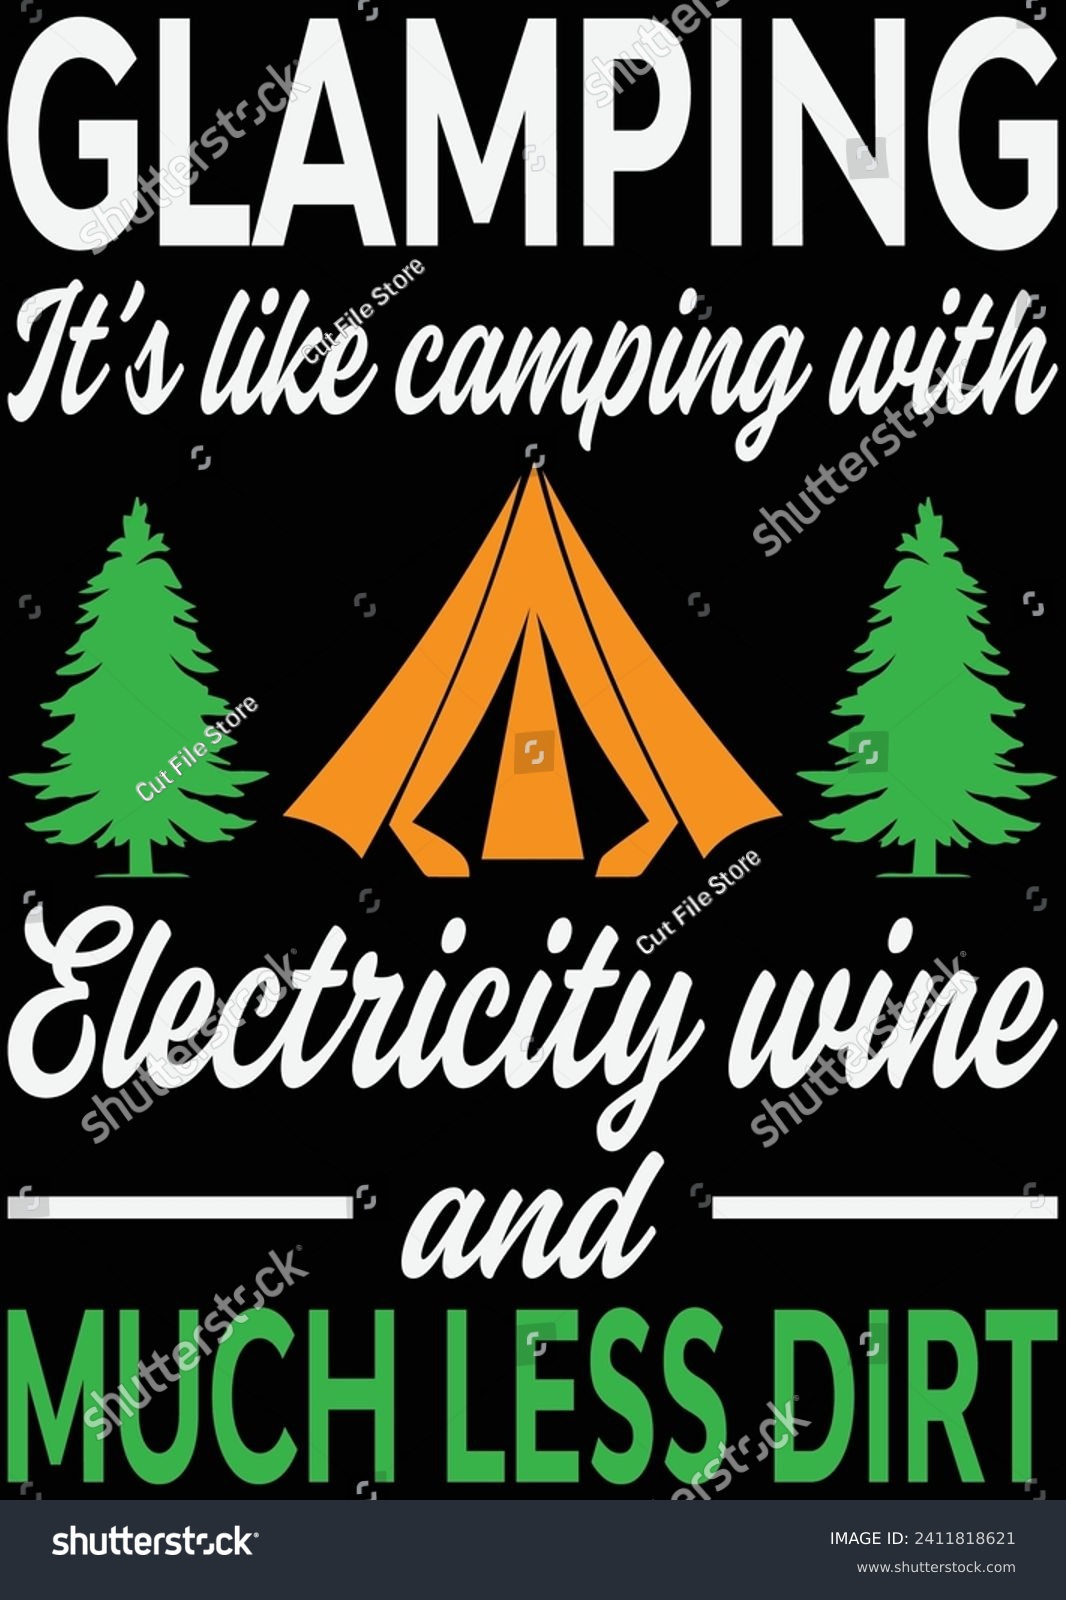 SVG of 
Glamping It's Like Camping With Electricity eps cut file for cutting machine svg